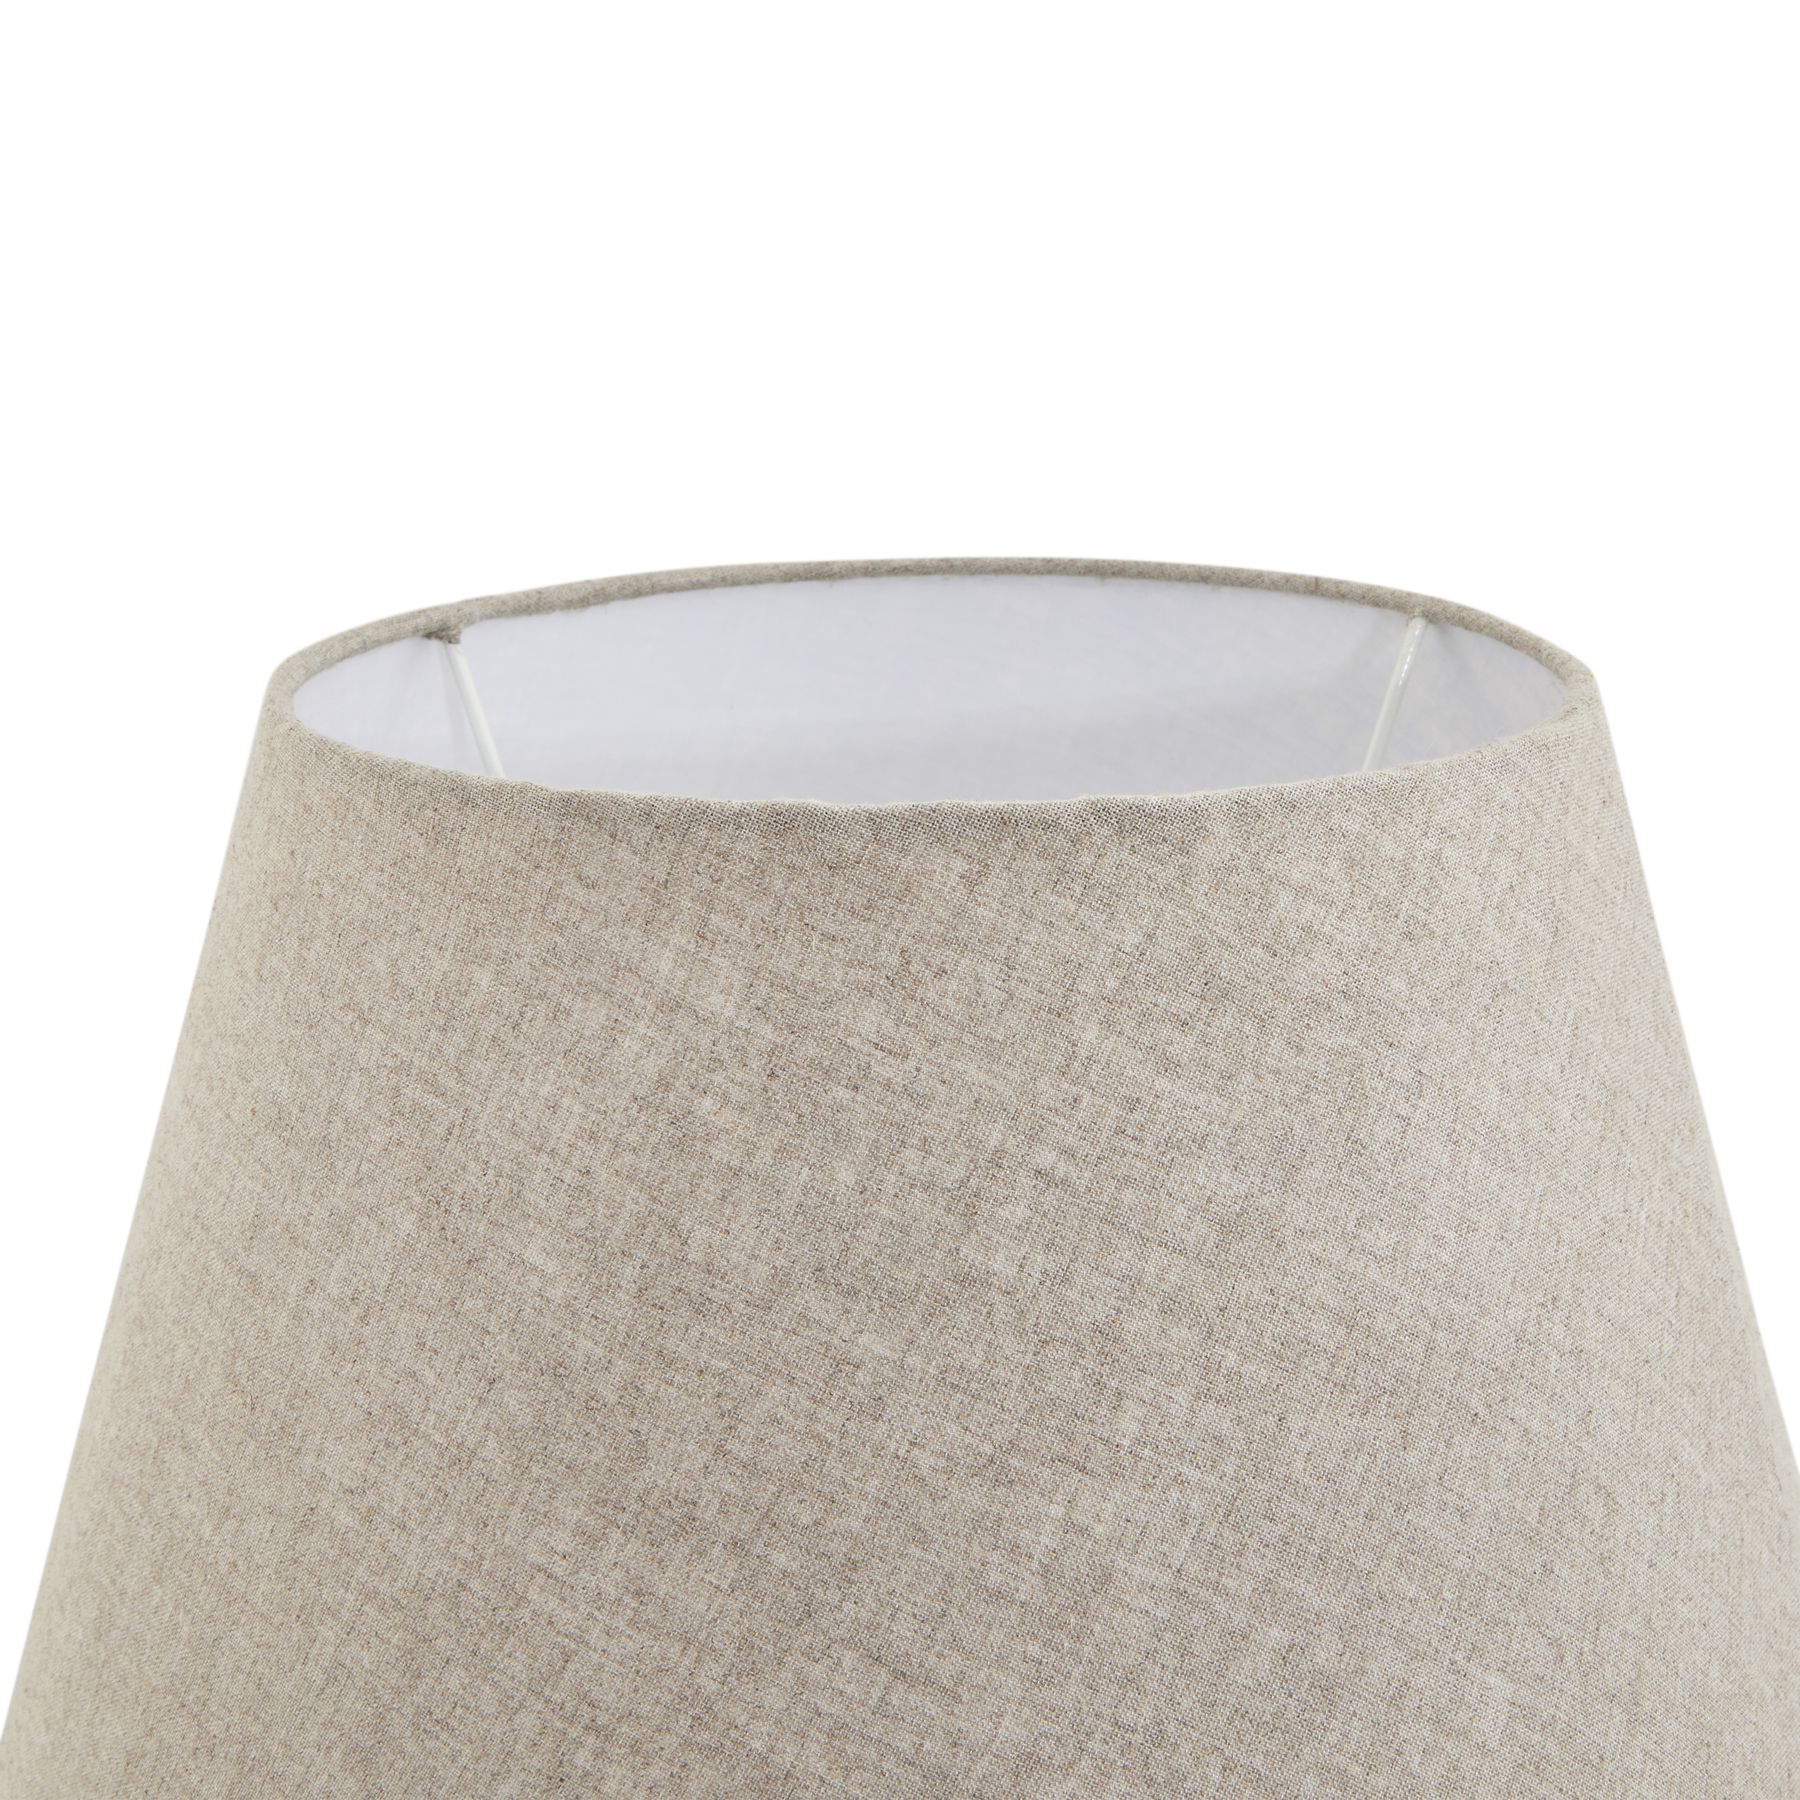 Darcy Antique White Candlestick Table Lamp With Linen Shade - Image 3